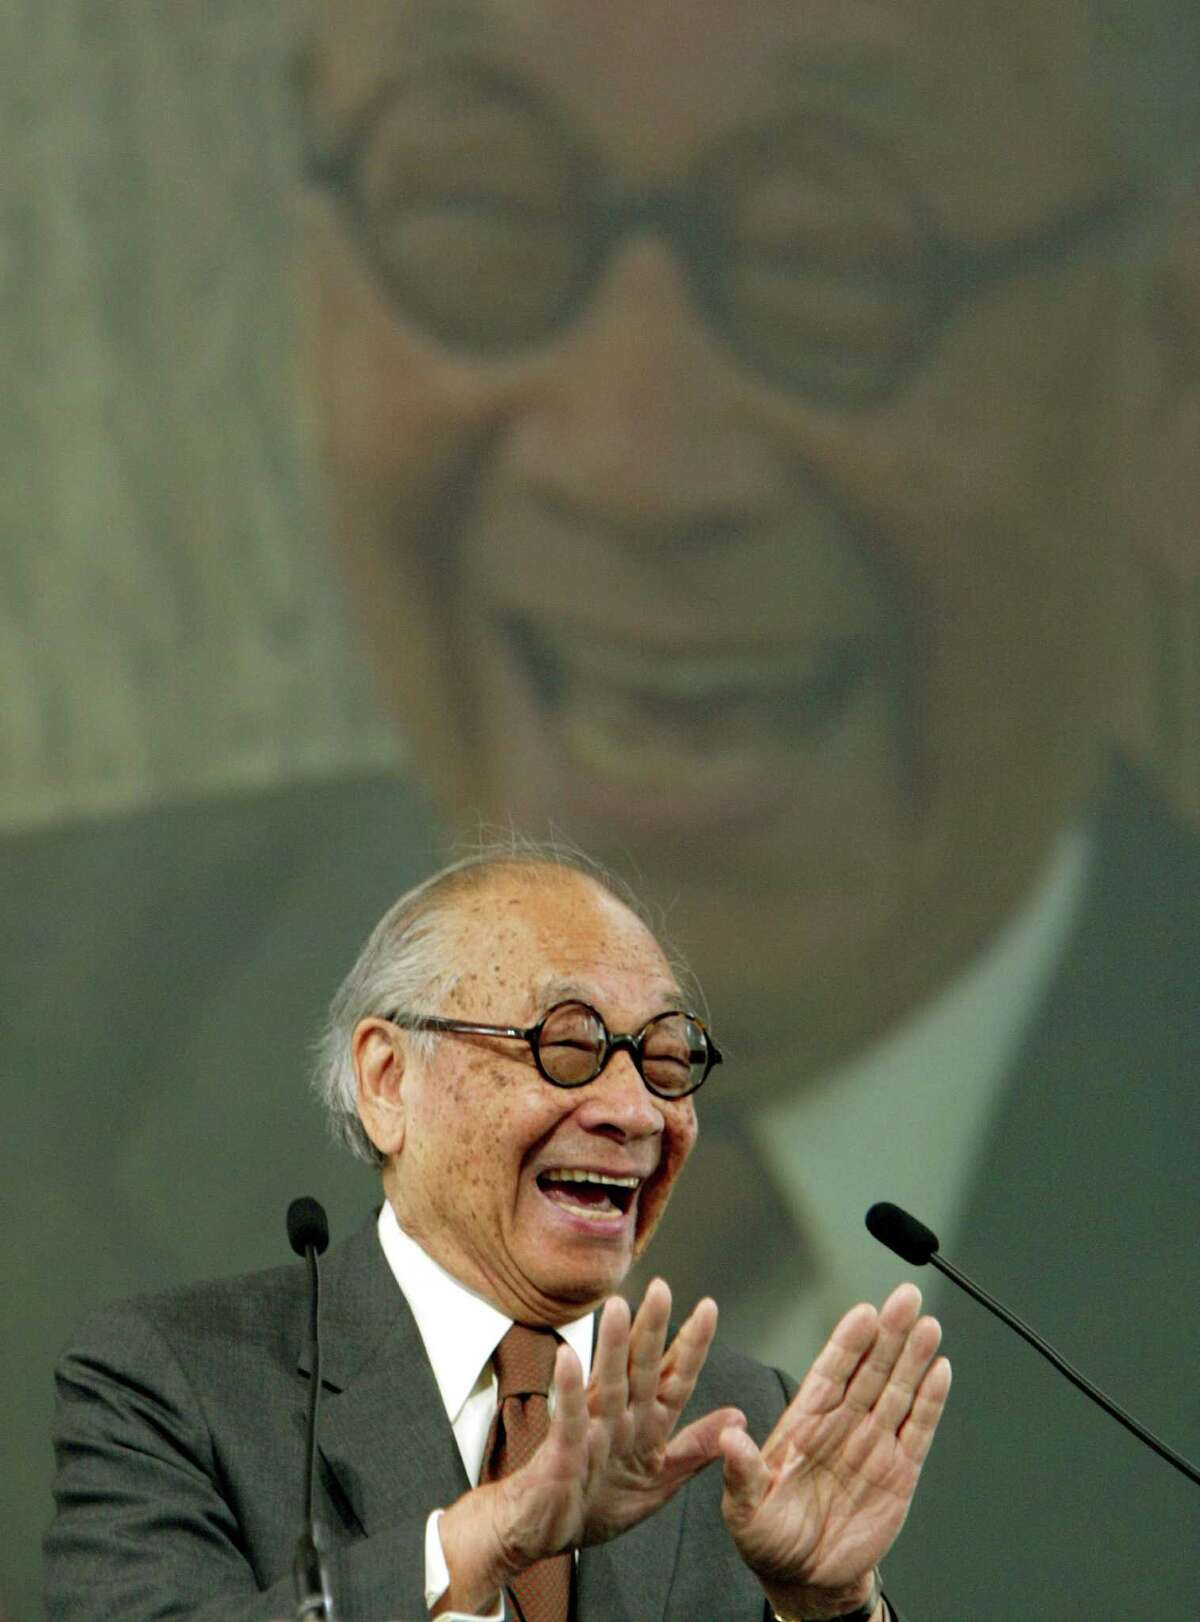 Architect I.M. Pei gestures as he speaks after receiving a 2004 Ellis Island Family Heritage award Wednesday, April 21, 2004, at Ellis Island in New York. Pei, born in China, came to America from Shanghai in 1935 to attend the Massachuesetts Institute of Technology. He entered the United States aboad the S.S. Preisdent Coolidge from San Francisco. Ellis Island was the main East Coast entry point for immigrants from 1897 and 1938.(AP Photo/Kathy Willens)